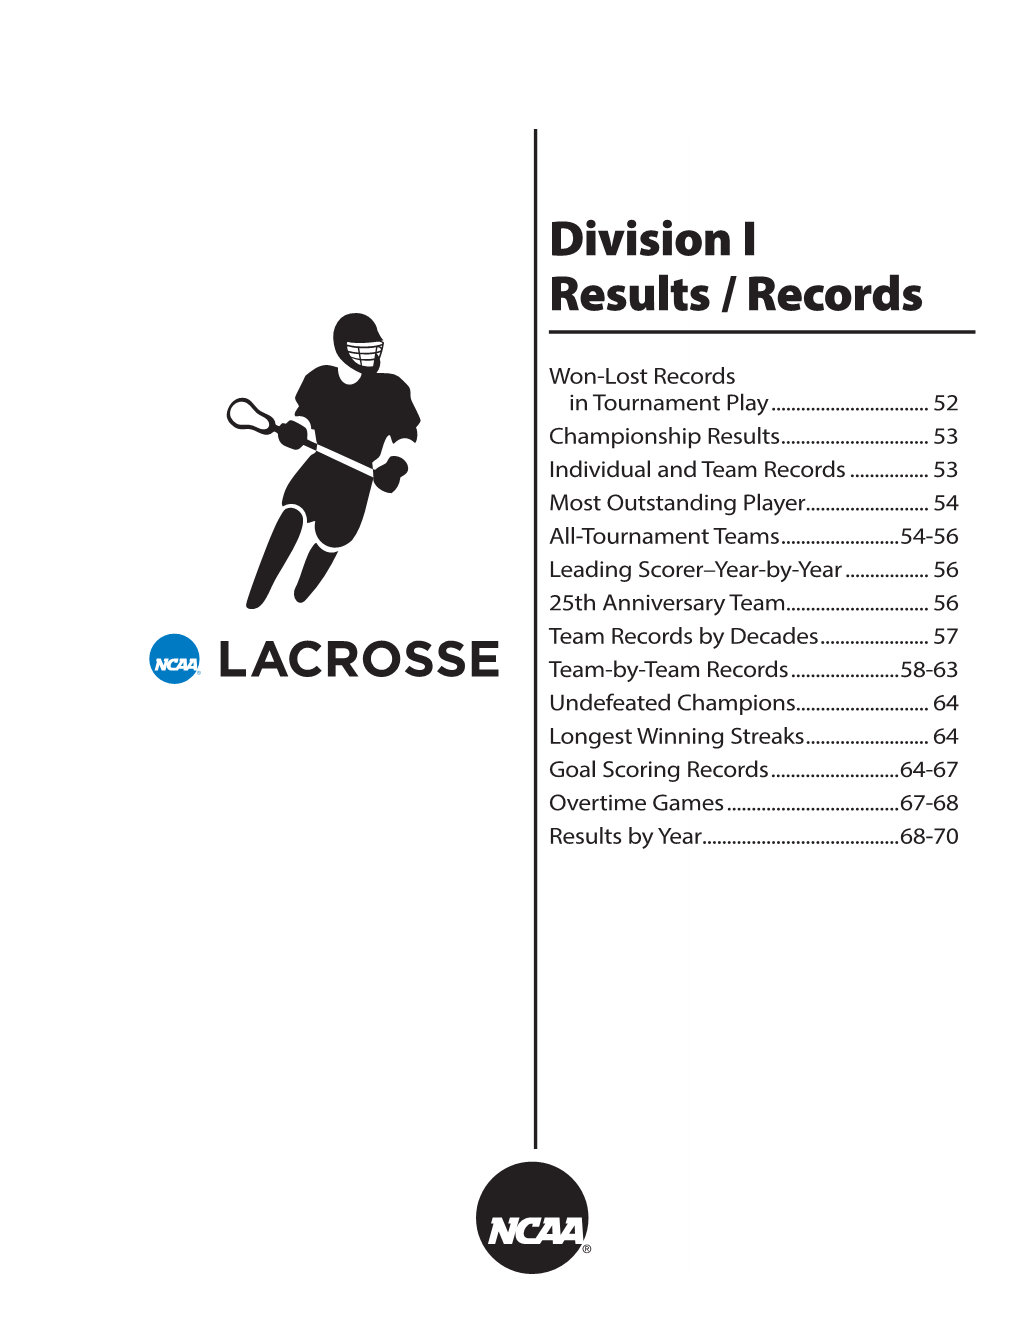 Division I Results / Records